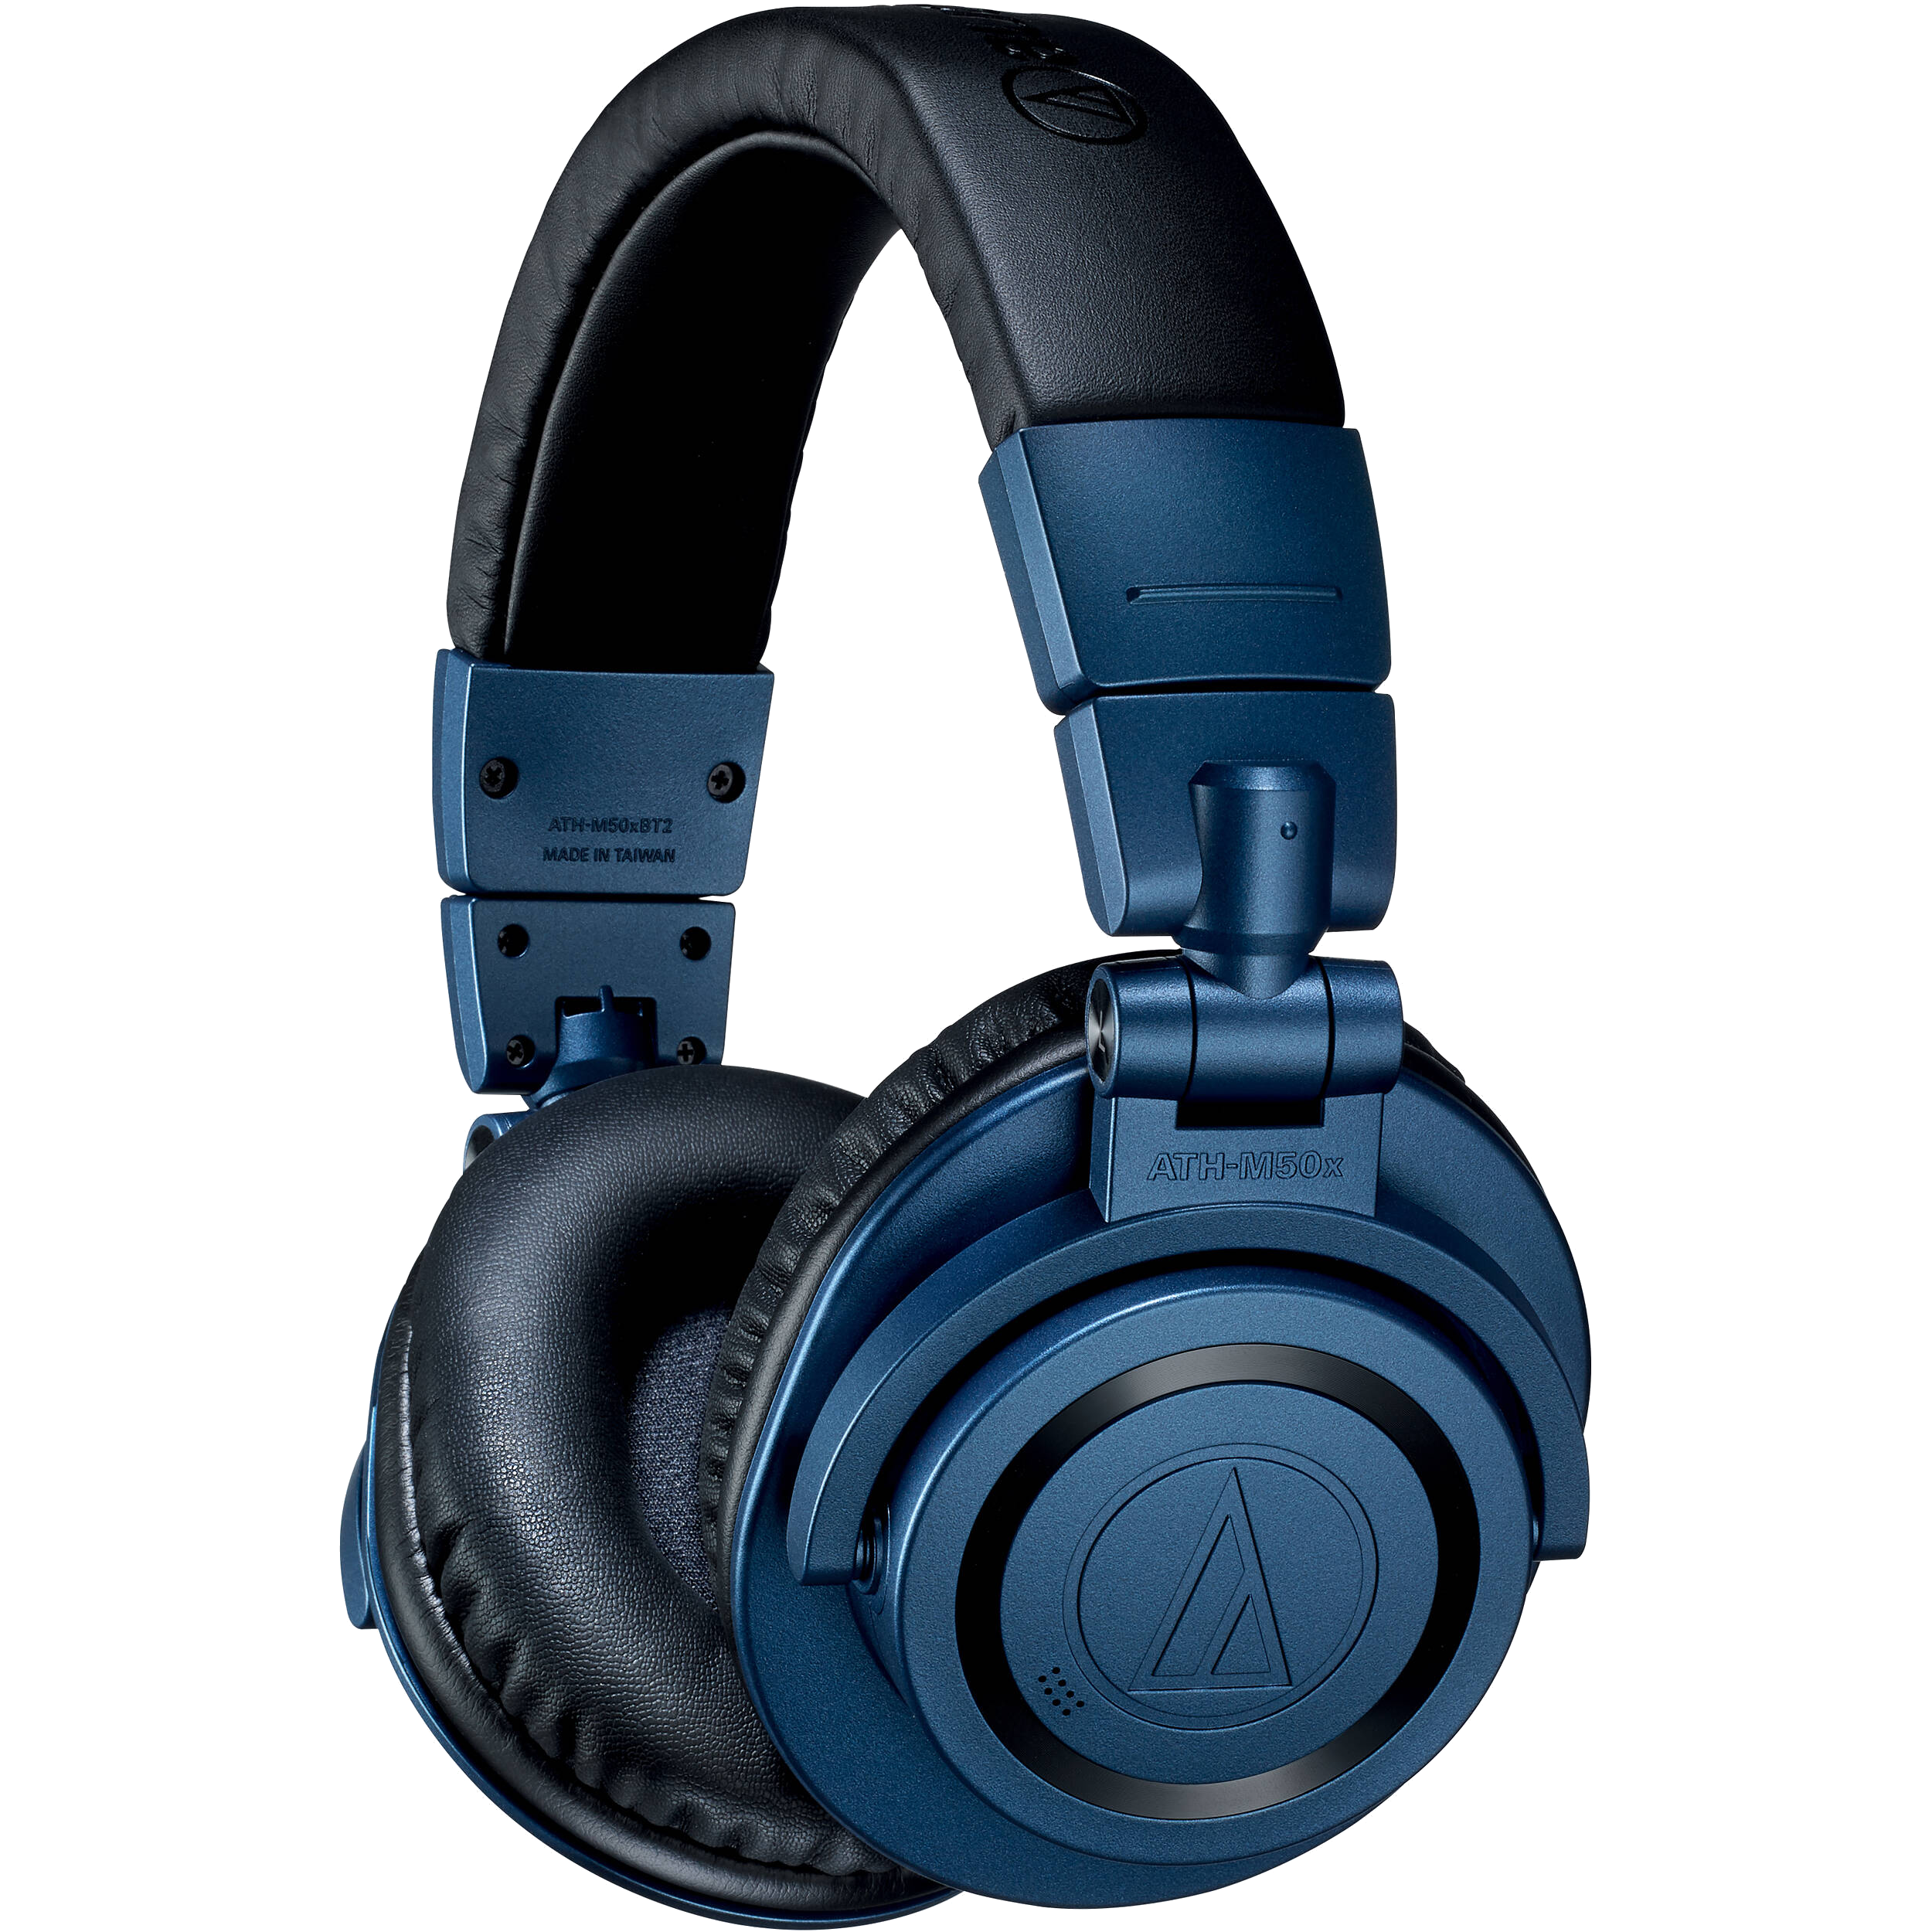 A picture of the Audio Technica ATH-M50xBT2 Limited Edition Deep Sea Blue